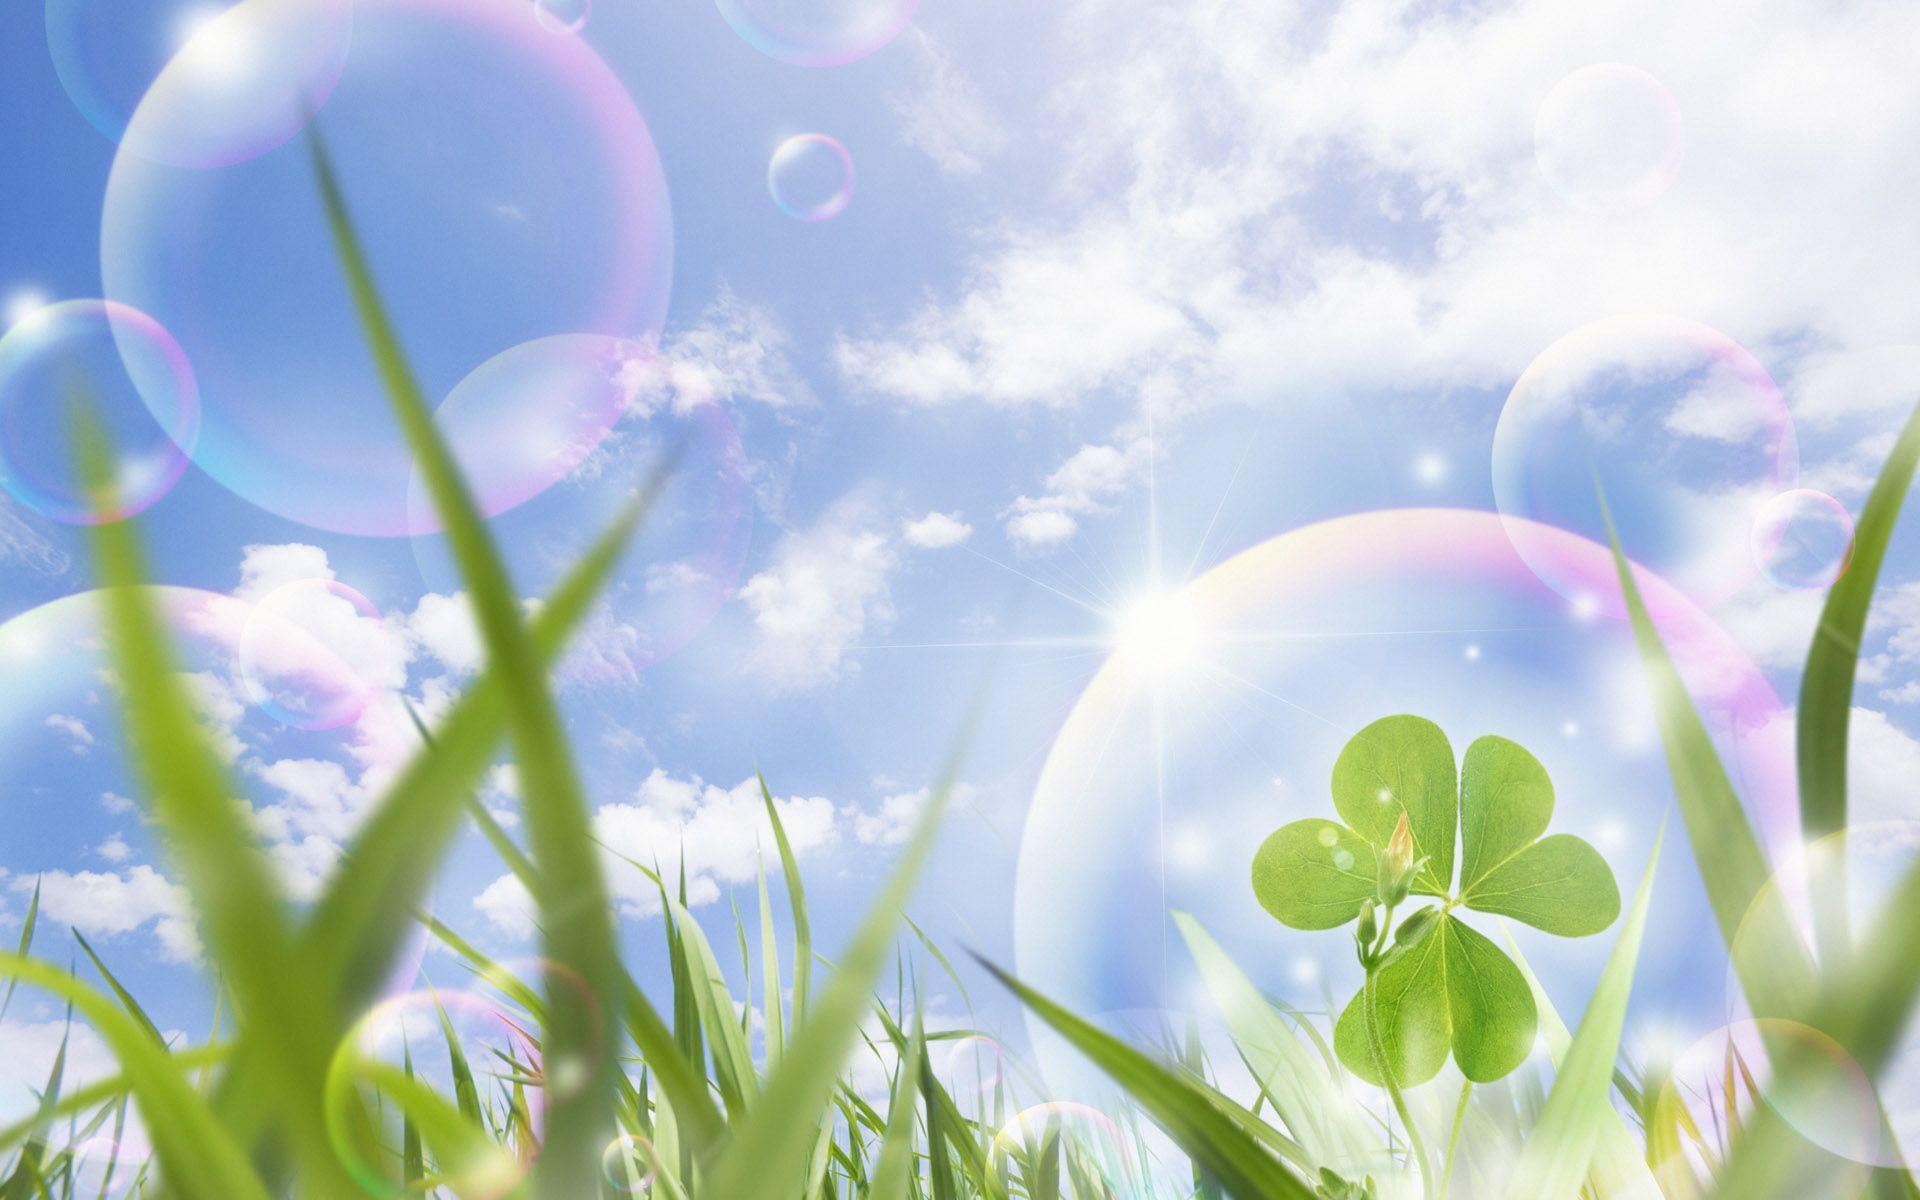 Bubbles and sky wallpapers | Bubbles and sky stock photos